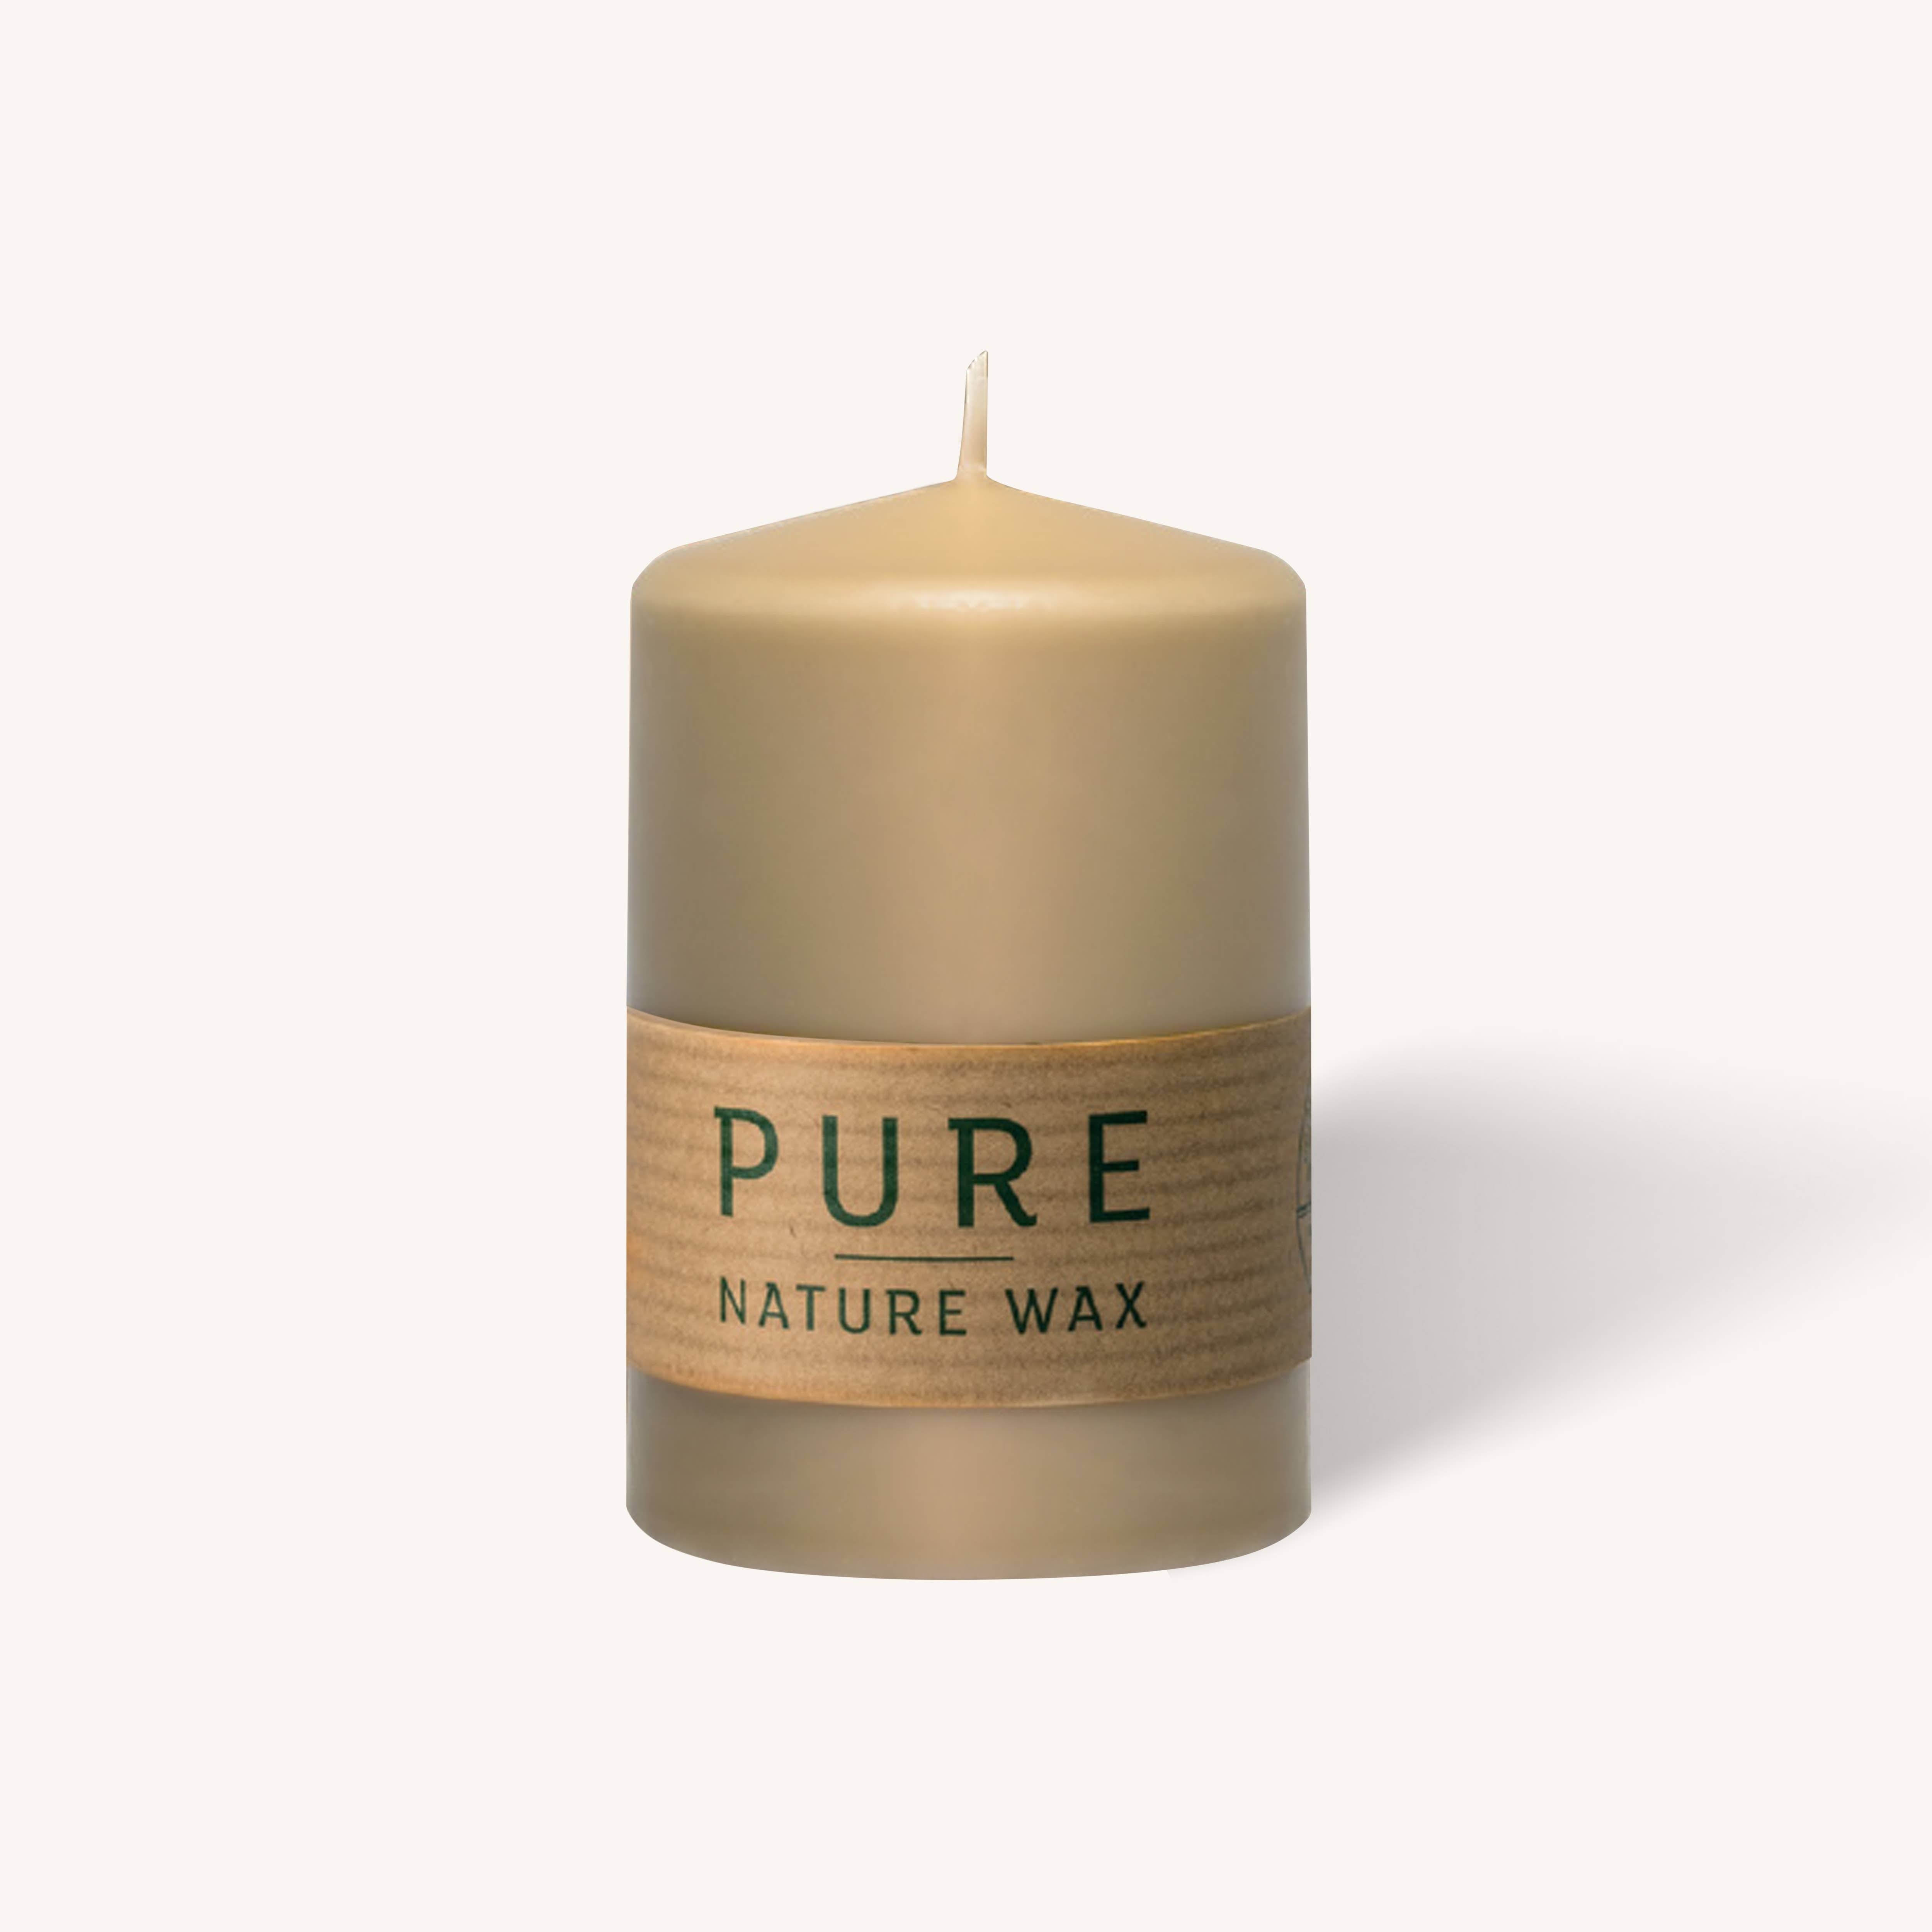 Pure Nature Wax Sand Pillar Candle - 2.3" x 3.5" - 4 Pack